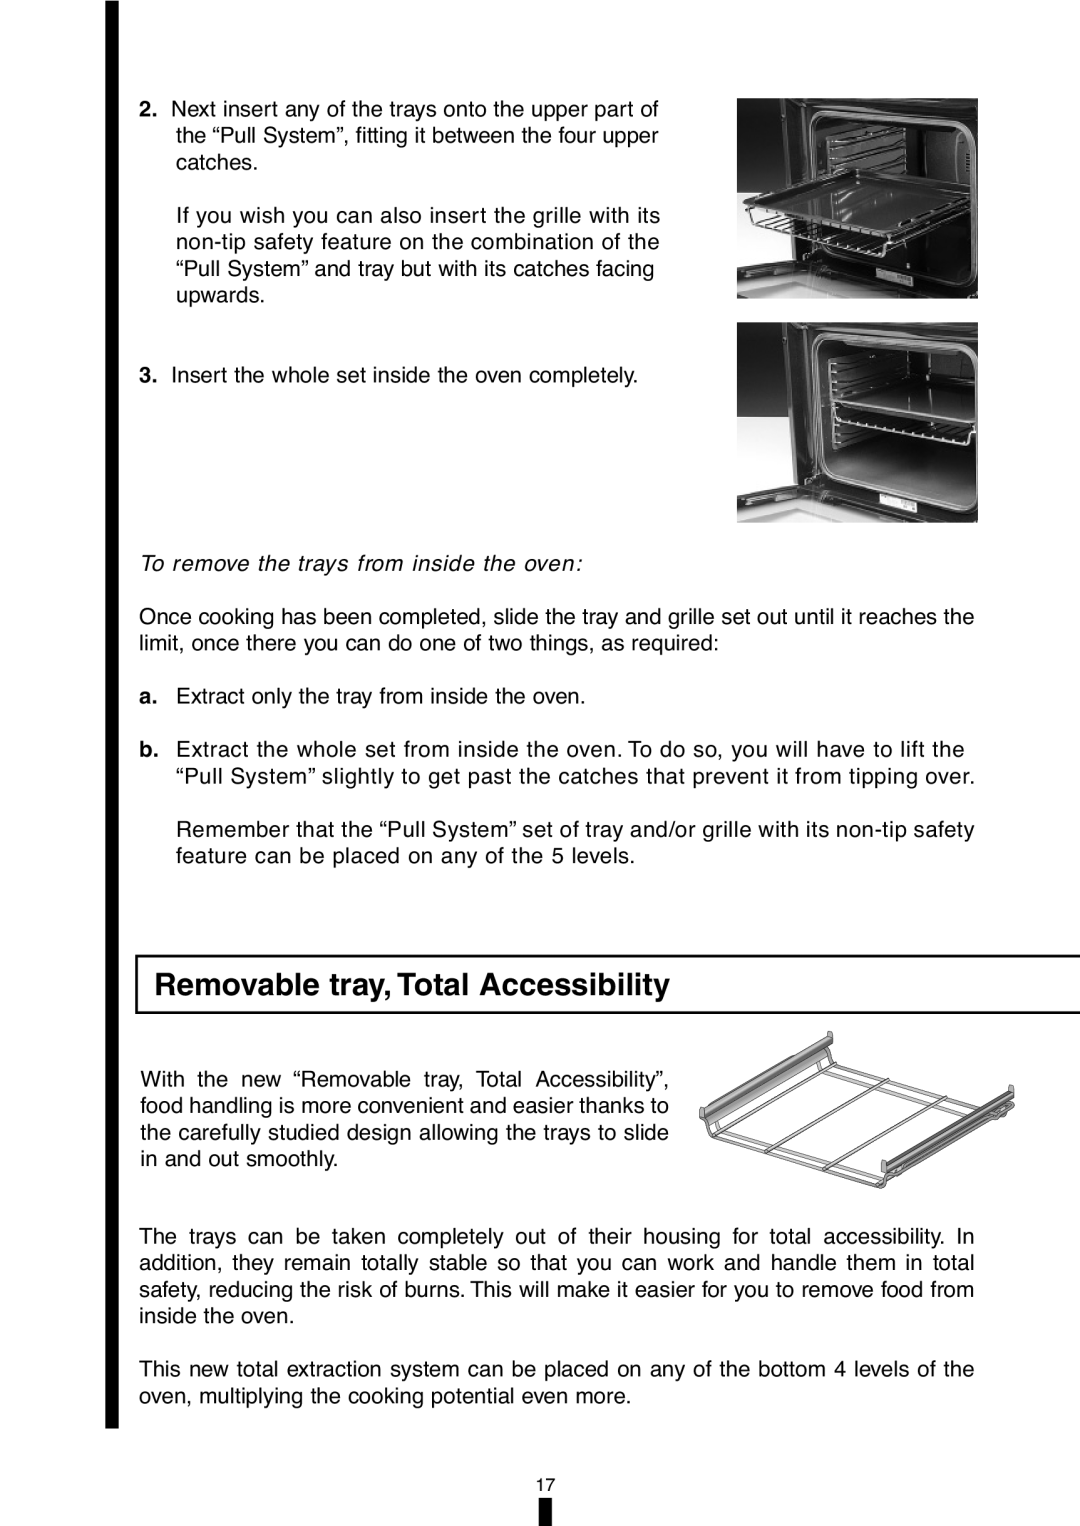 Fagor America 5HA-196X manual Removable tray, Total Accessibility, To remove the trays from inside the oven 